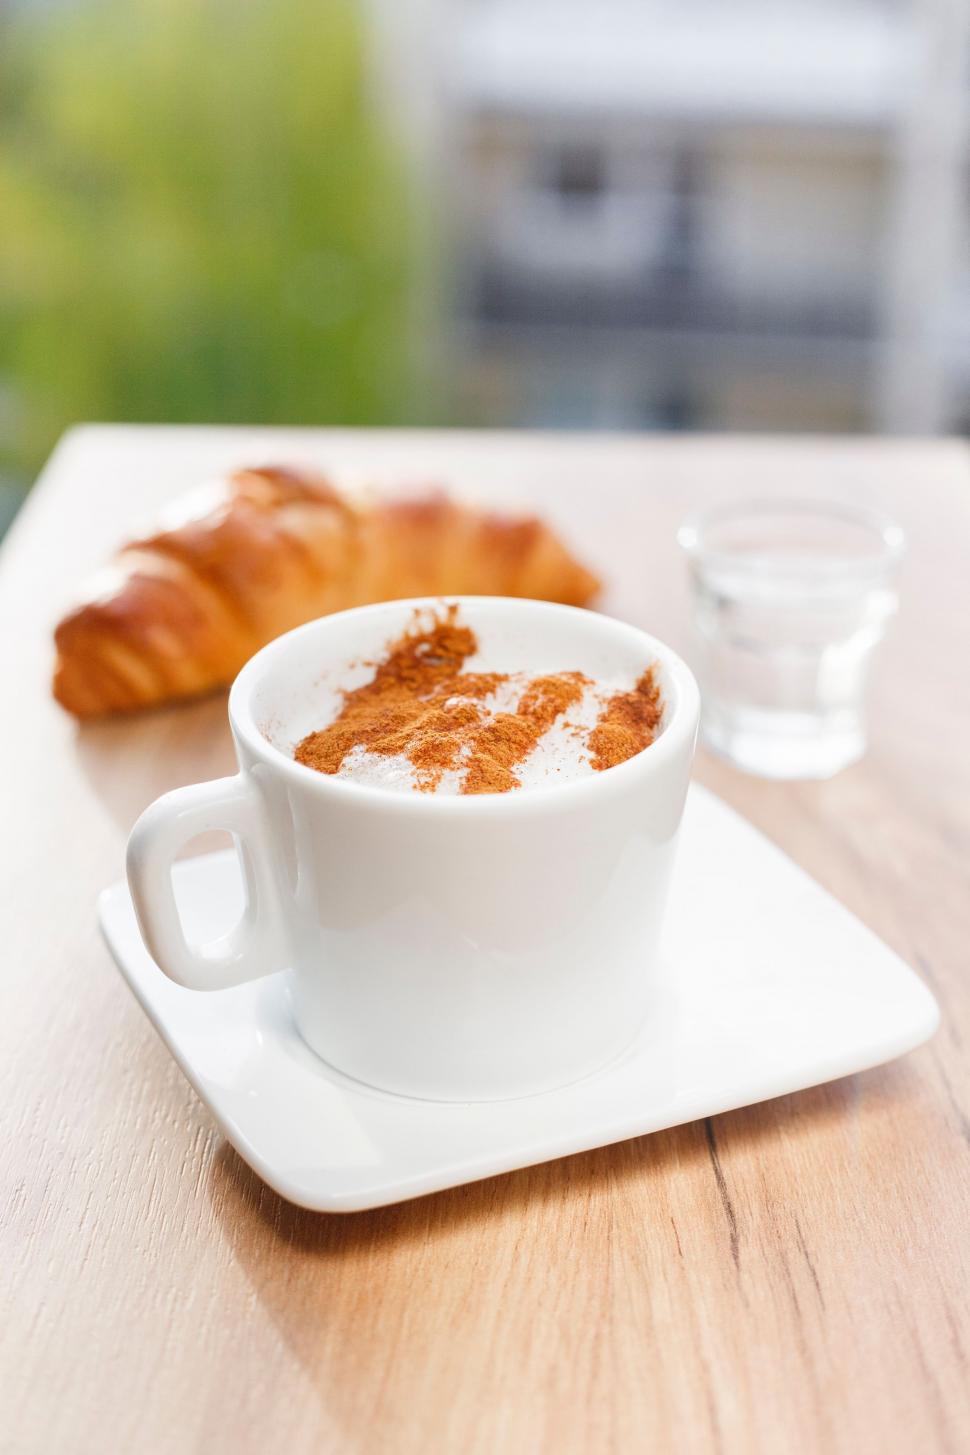 Free Image of A Cup of Coffee on a Saucer on a Table 